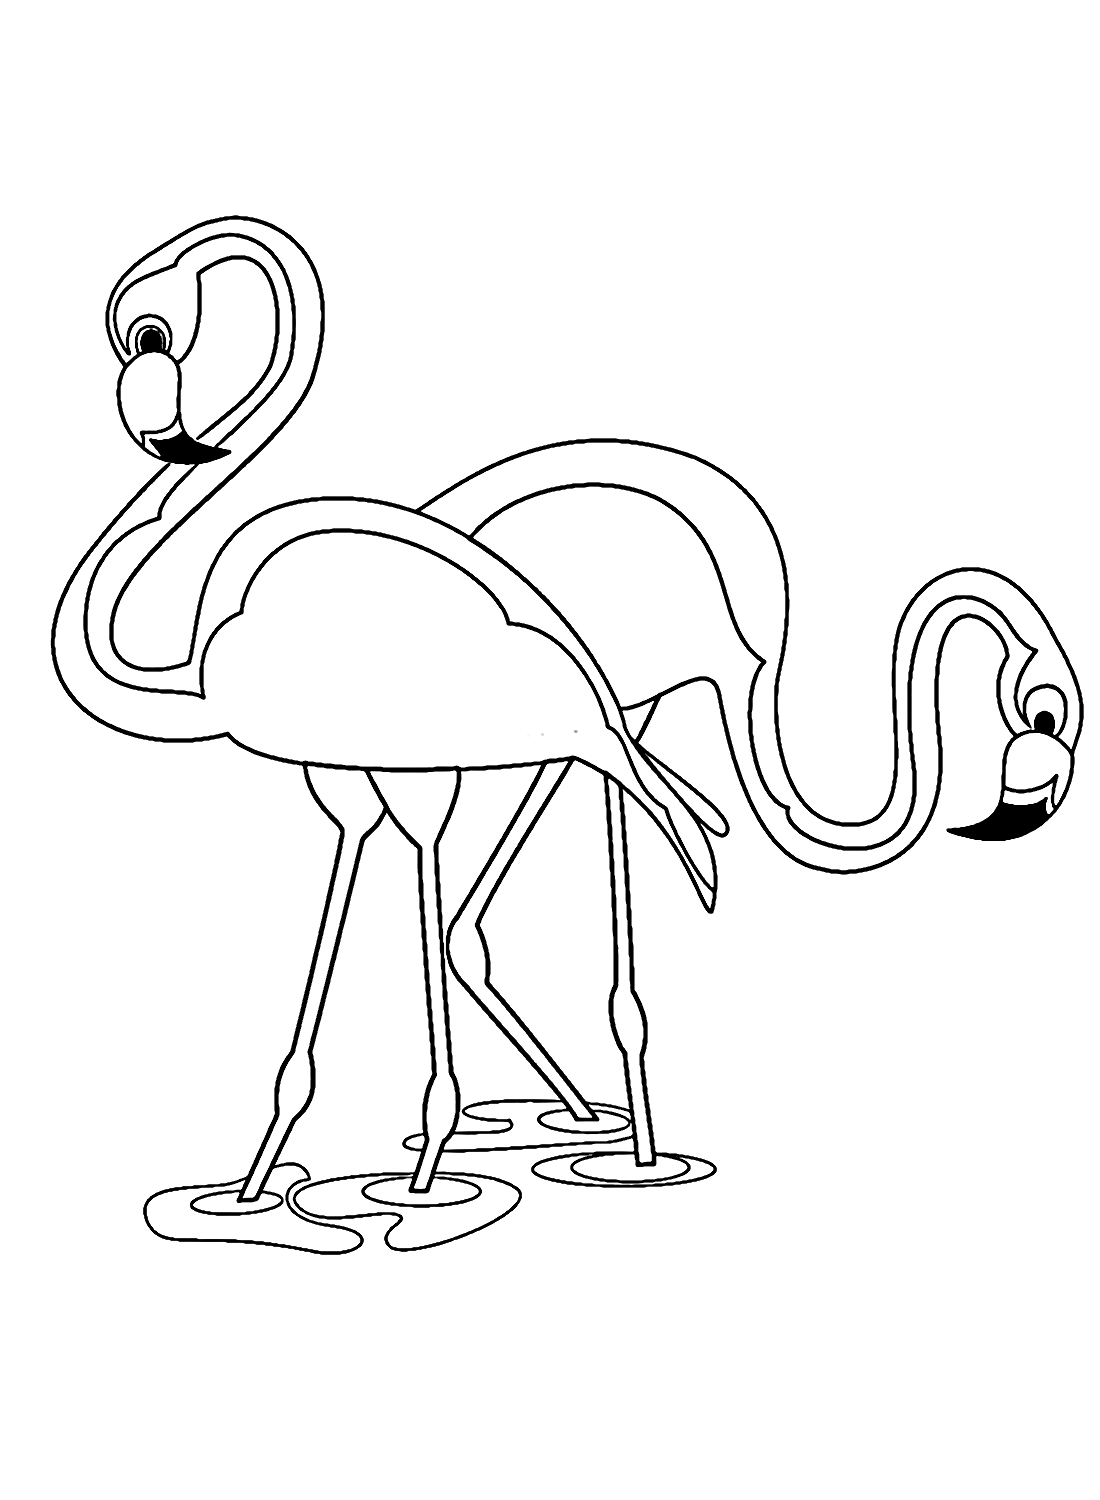 Two Flamingos Looking for Food Coloring Pages